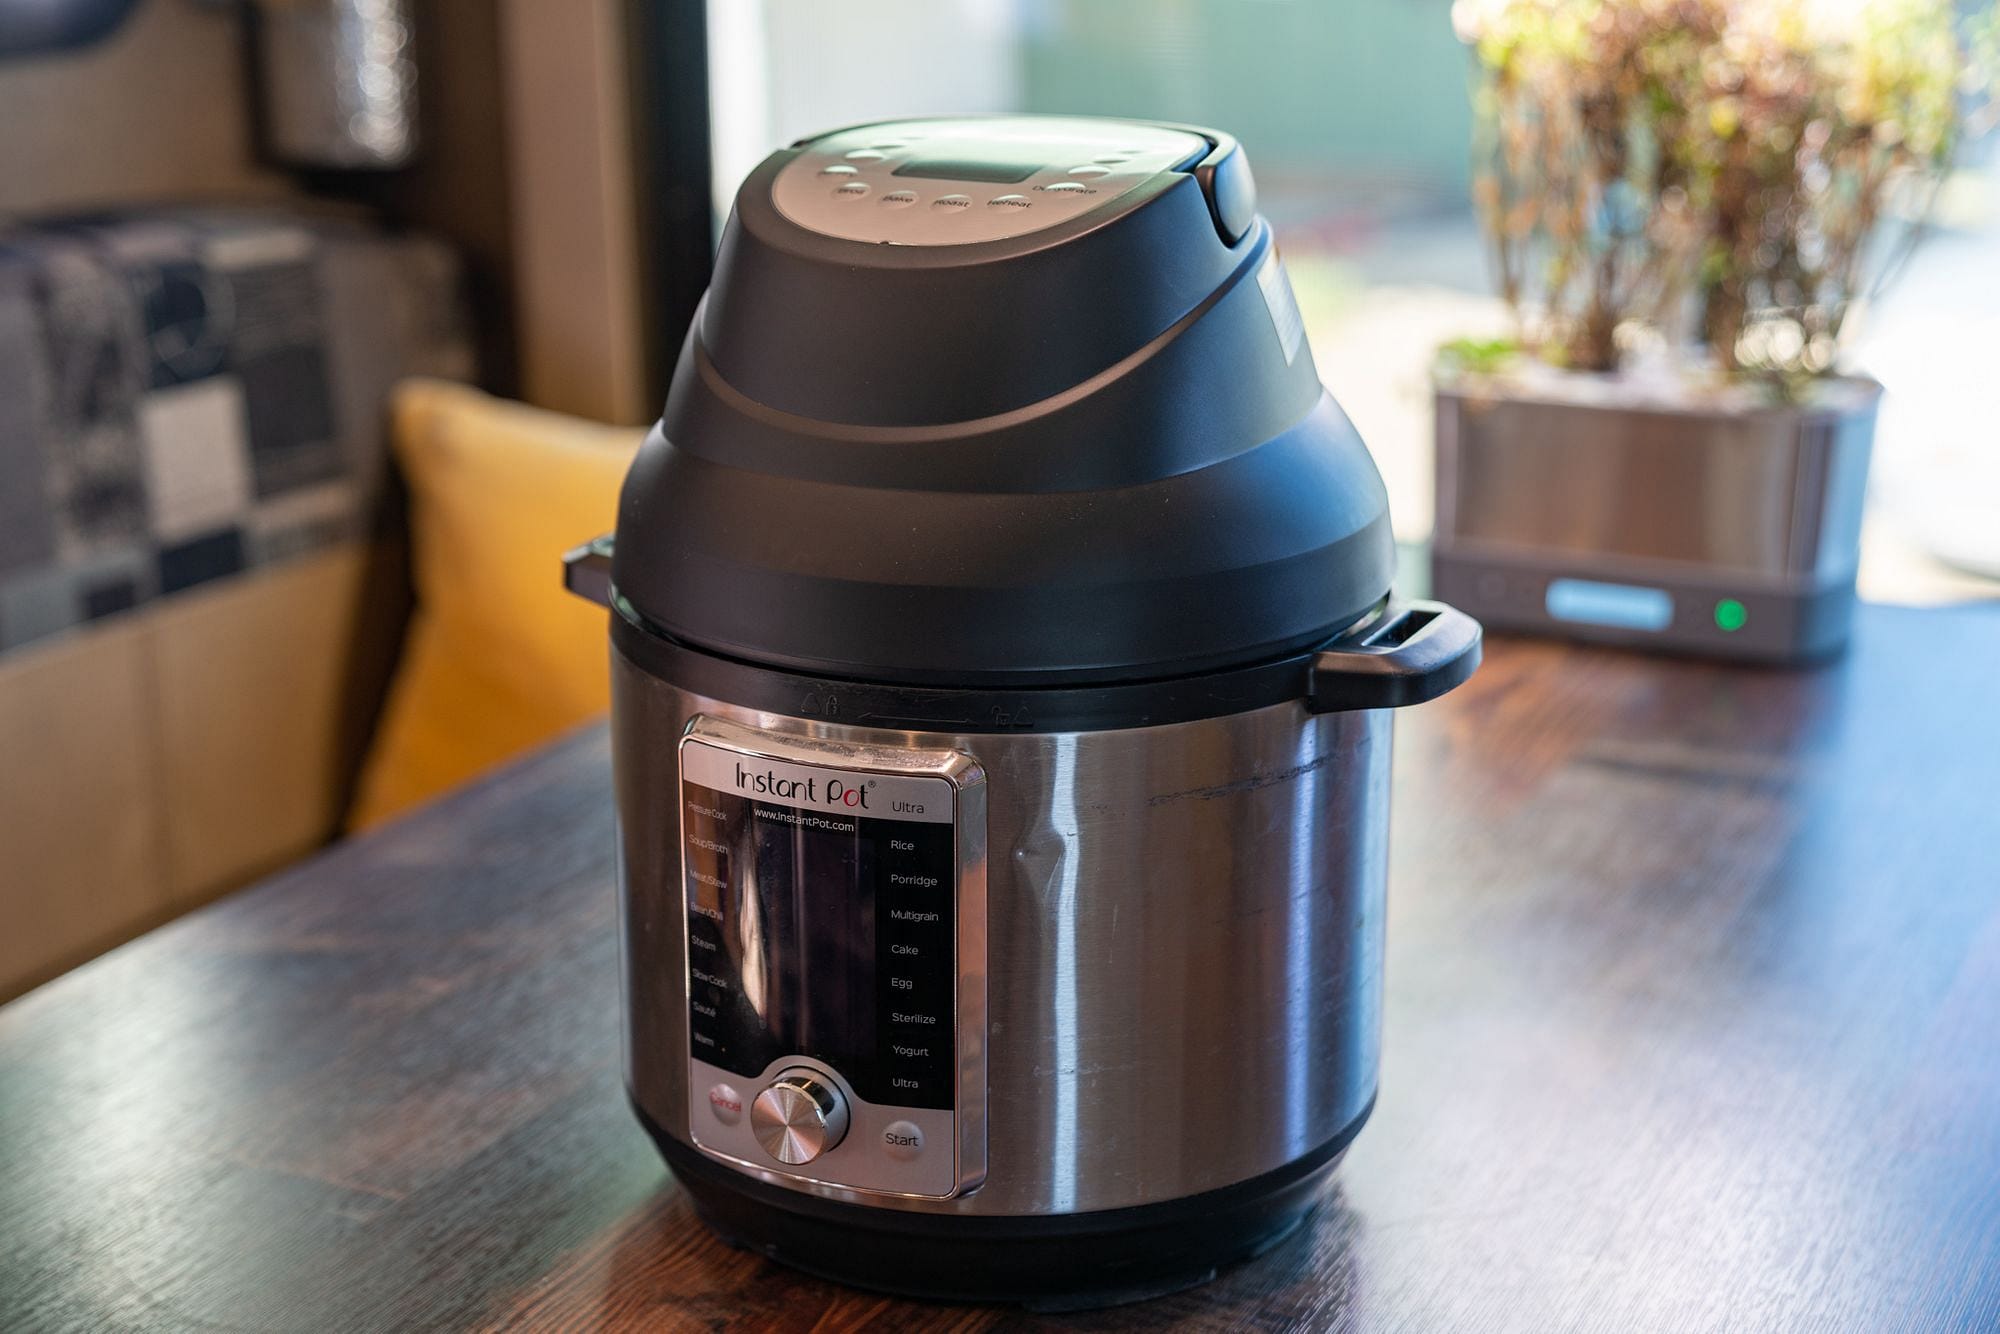 Instant Pot Duo Crisp Review ~ What does this appliance do? Let's find out!  - The Salted Pepper